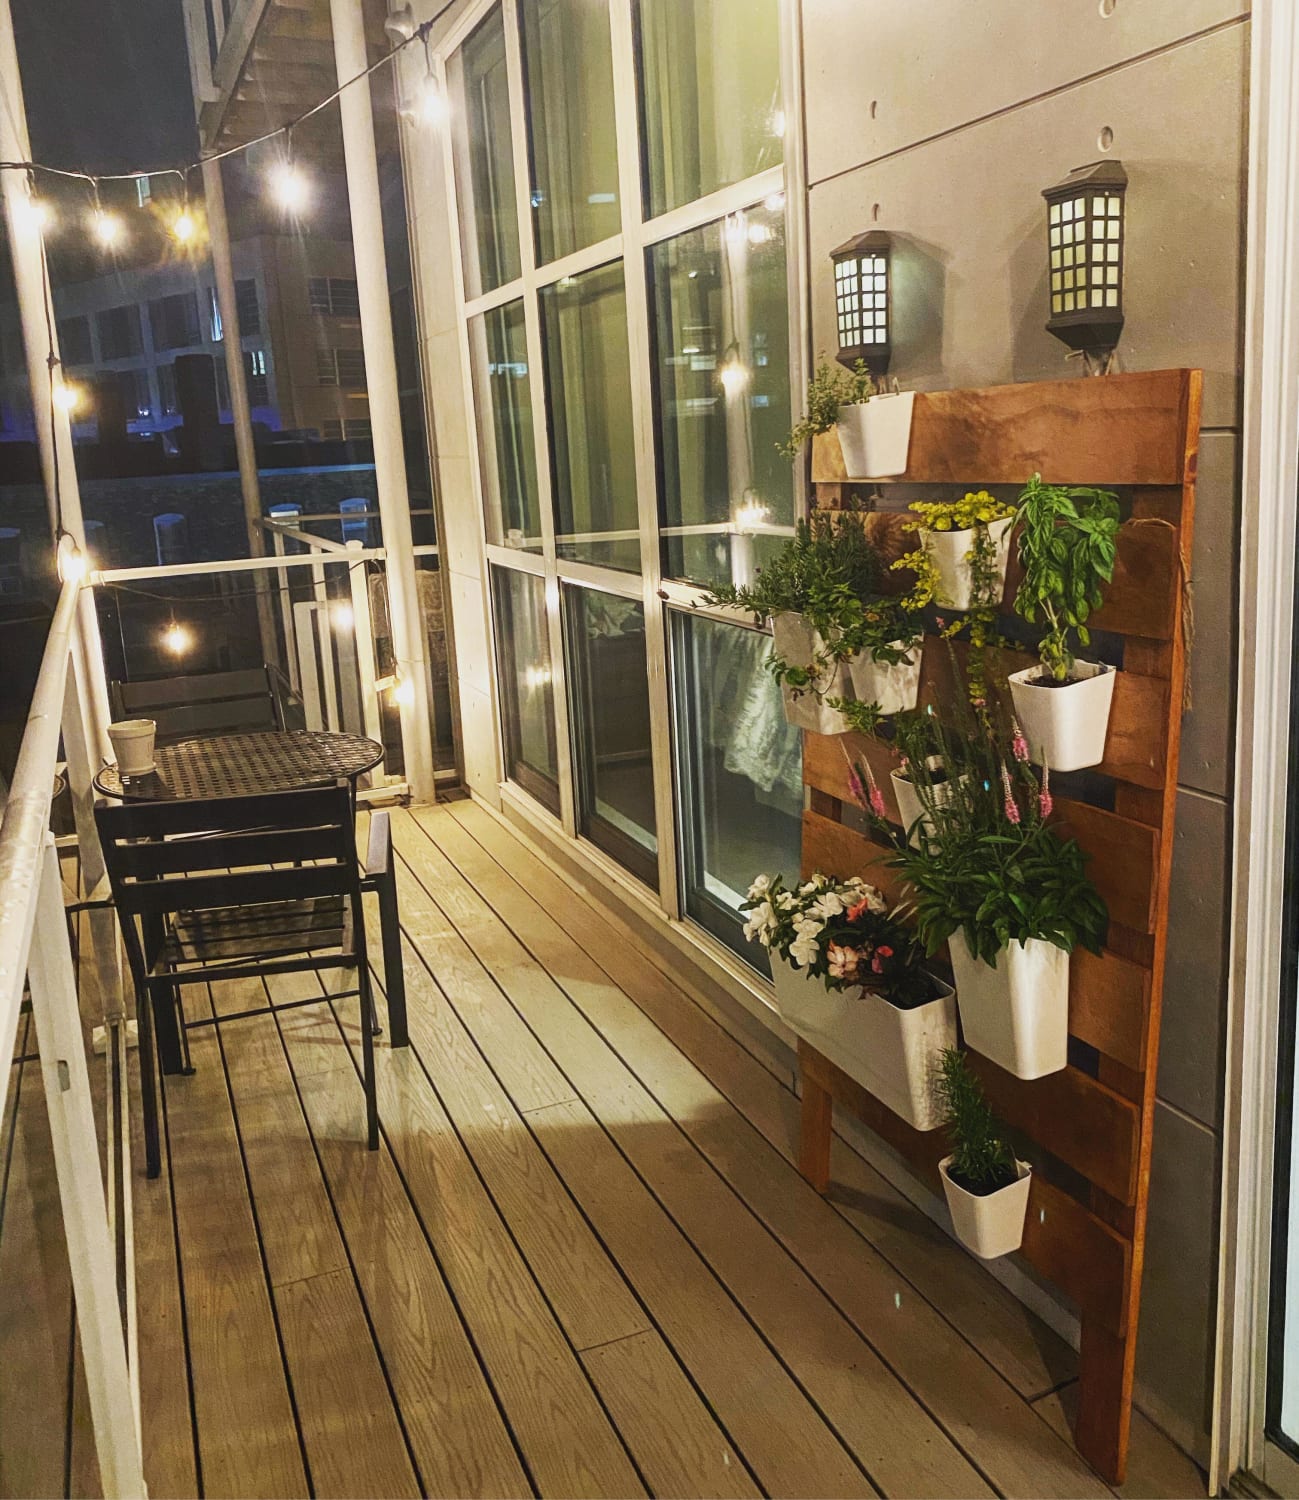 Made a DIY herb/plant wall and I think it makes my balcony so much more cozy